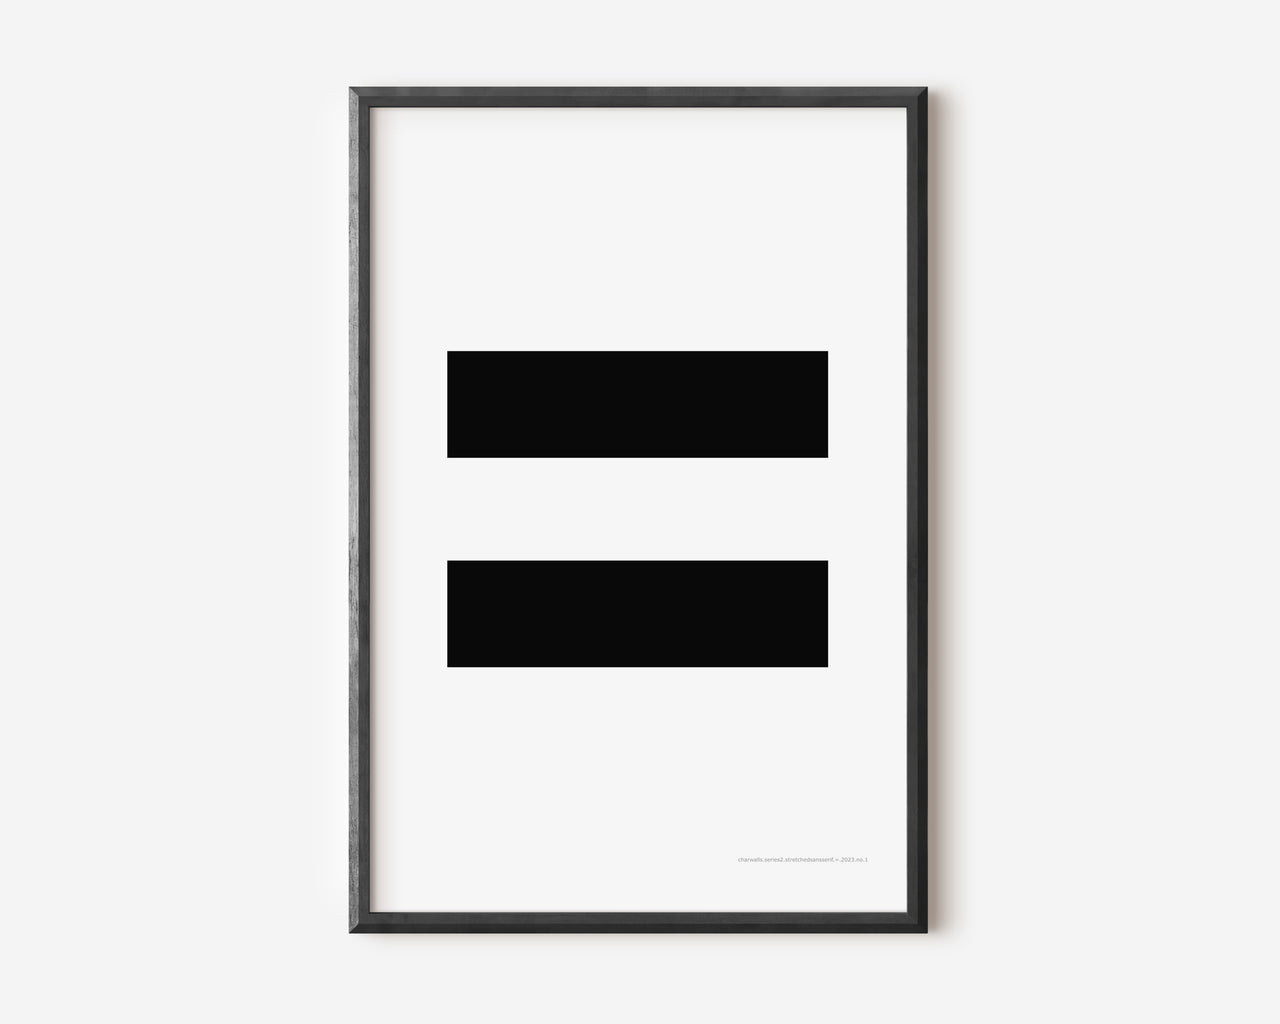 Modern symbol art print with a black equals sign on a white background.